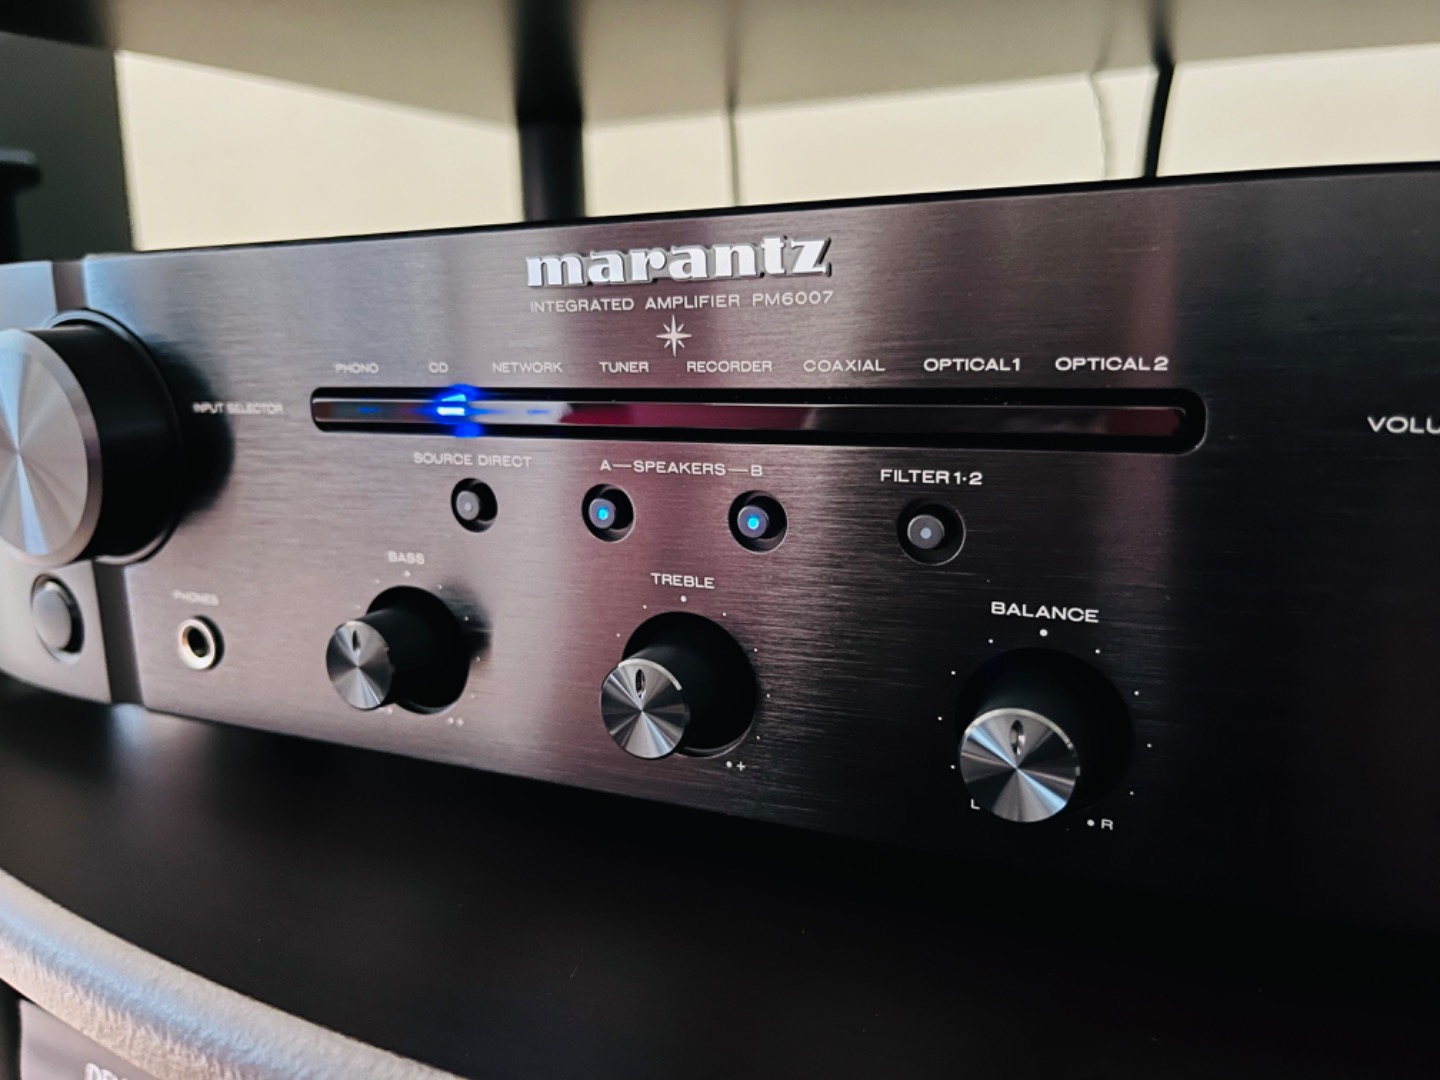 Marantz PM6007 review: a formidable entry-level stereo amplifier